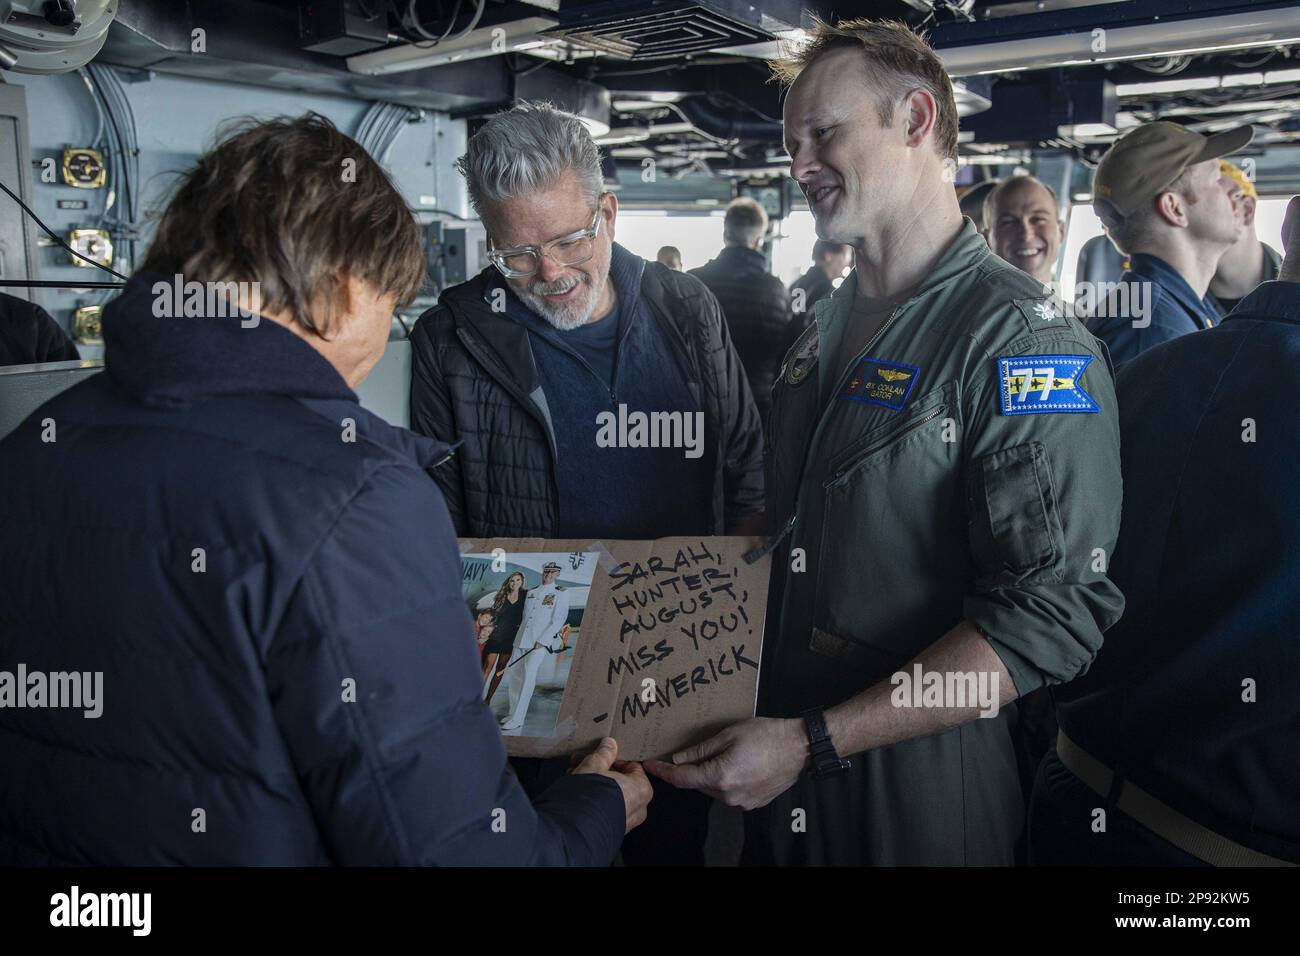 Cmdr. Brian Conlan, Navigator aboard the Nimitz-class aircraft carrier USS George H. W. Bush (CVN 77), shows Tom Cruise a family photo during a visit to the ship, on March 3, 2023, while filming scenes for 'Mission: Impossible - Dead Reckoning Part Two.' The George H.W. Bush Carrier Strike Group is on a scheduled deployment in the U.S. Naval Forces Europe area of operations, employed by U.S. Sixth Fleet to defend U.S., allied and partner interests. Photo by MC3 Samuel Wagner/U.S. Navy/UPI Stock Photo